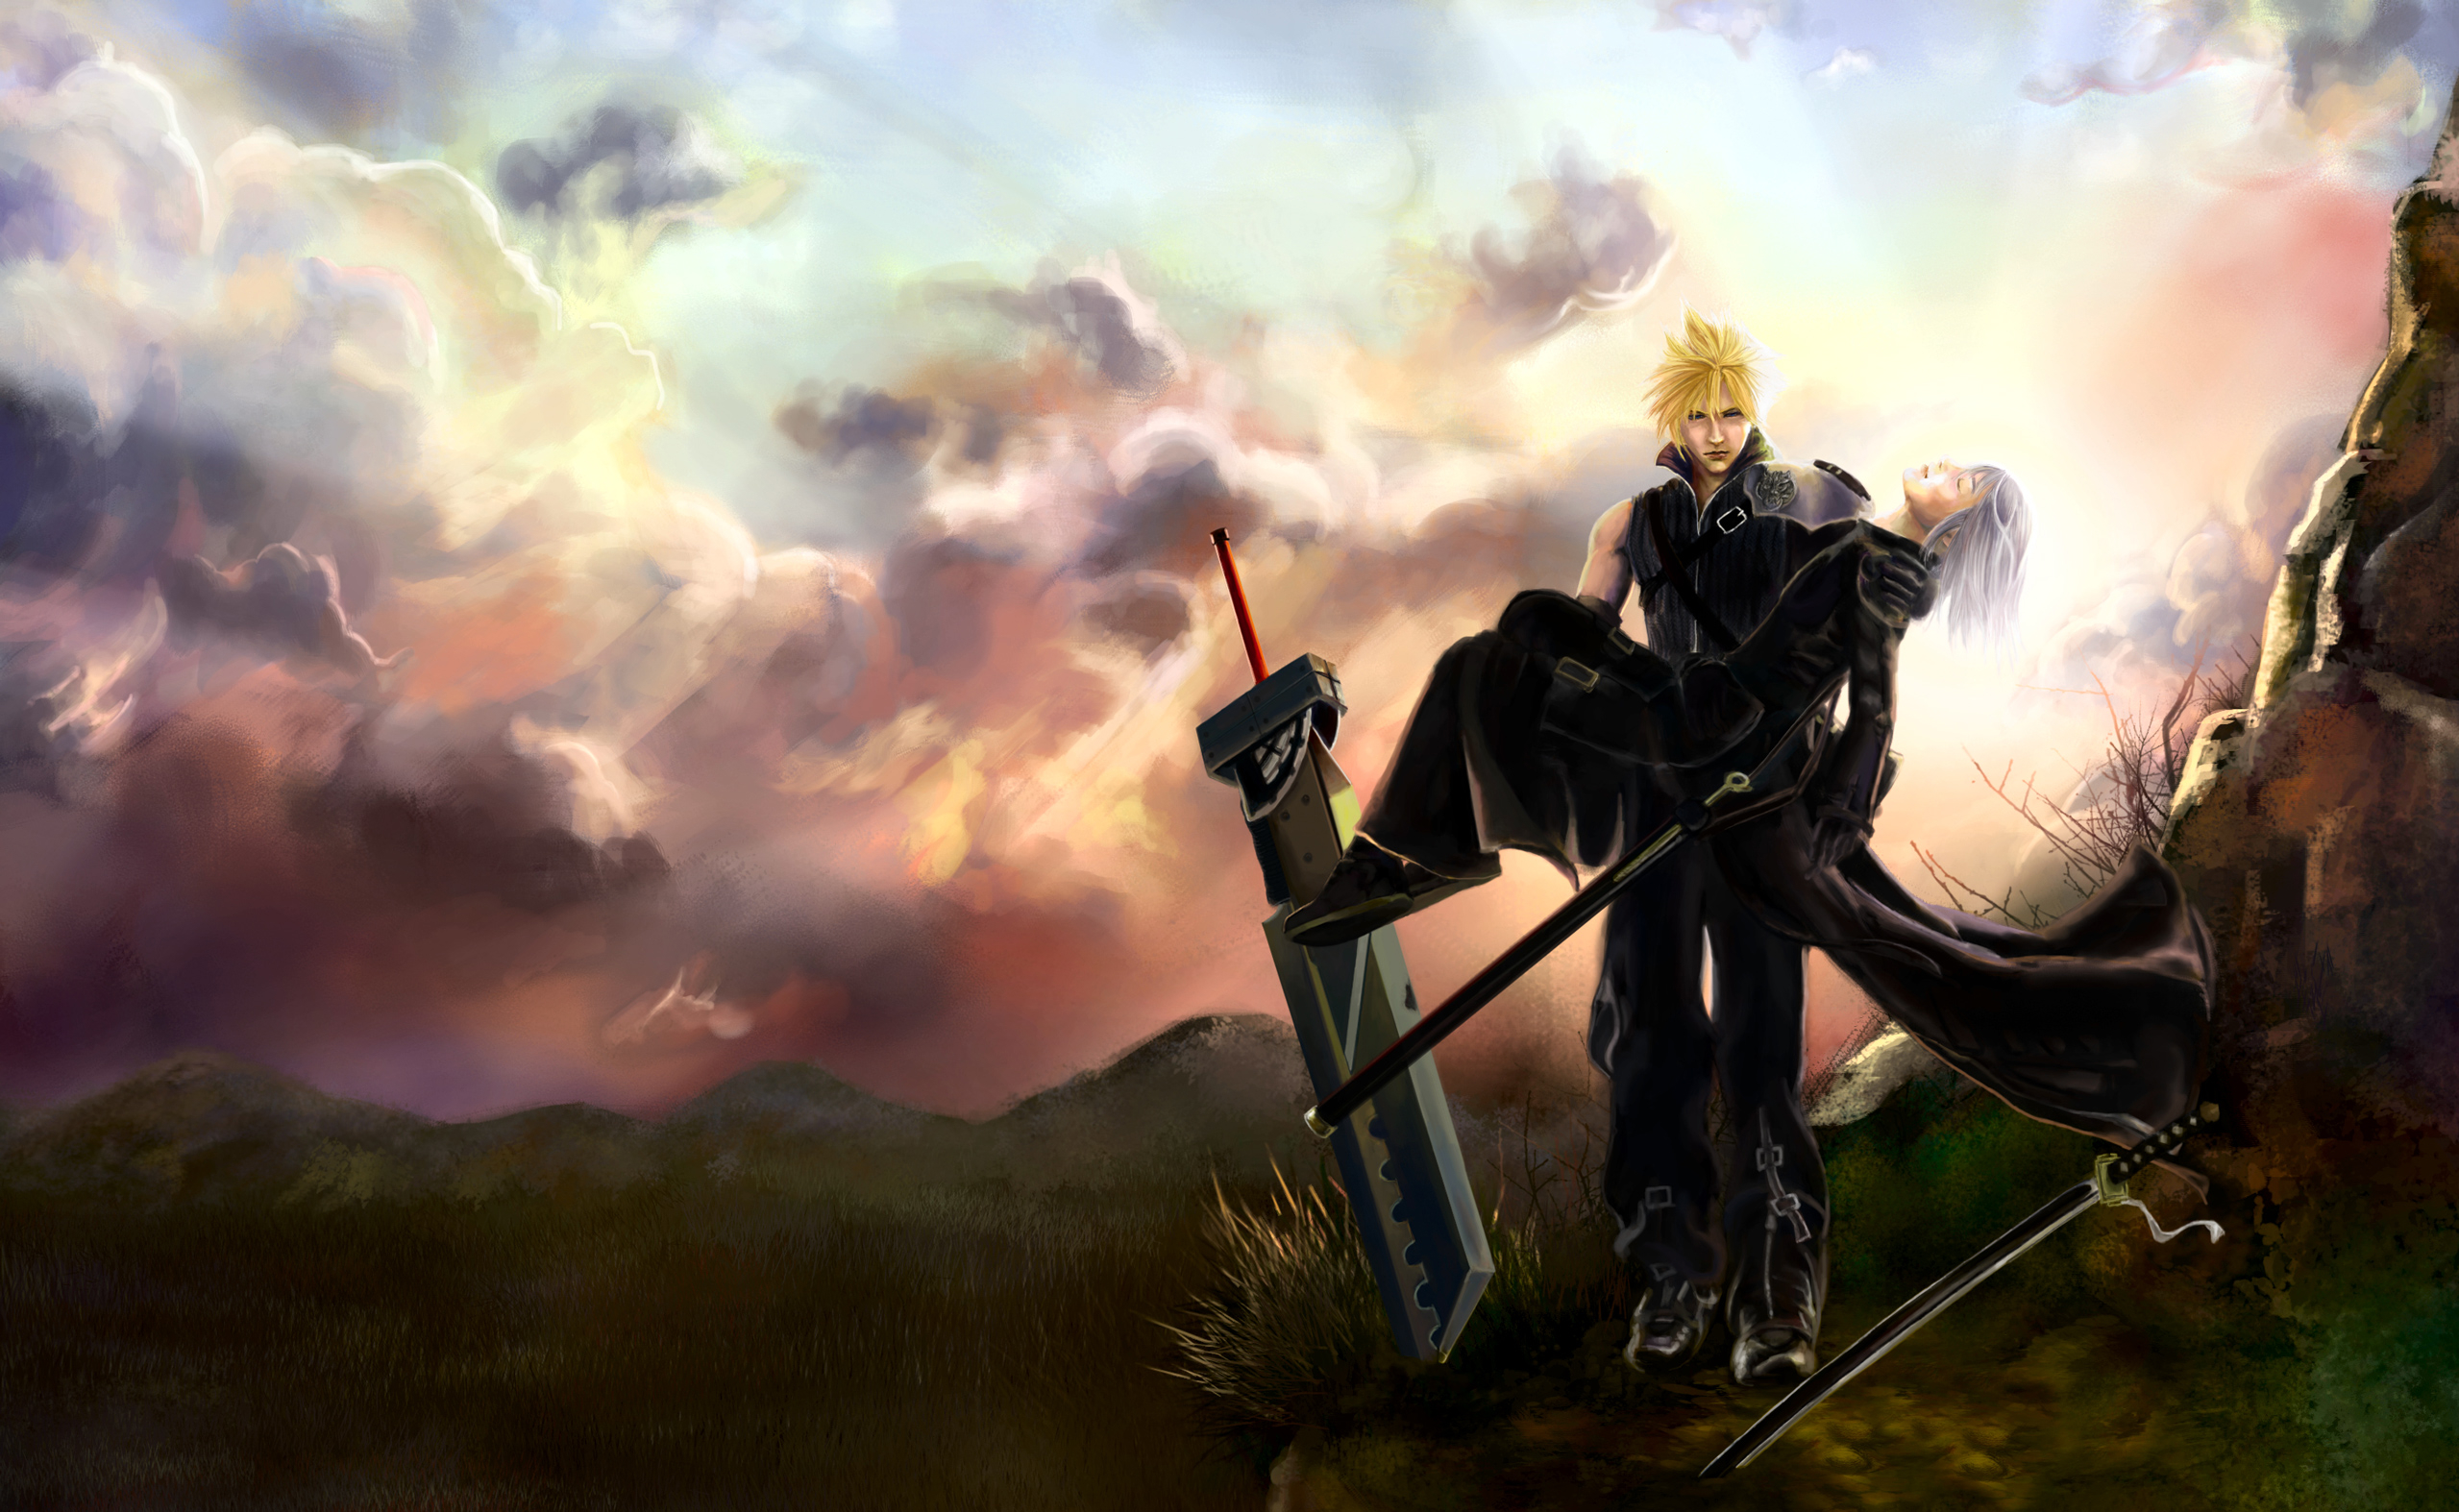 Final Fantasy Advent Children wallpaper featuring Cloud Strife and Kadaj from the anime.